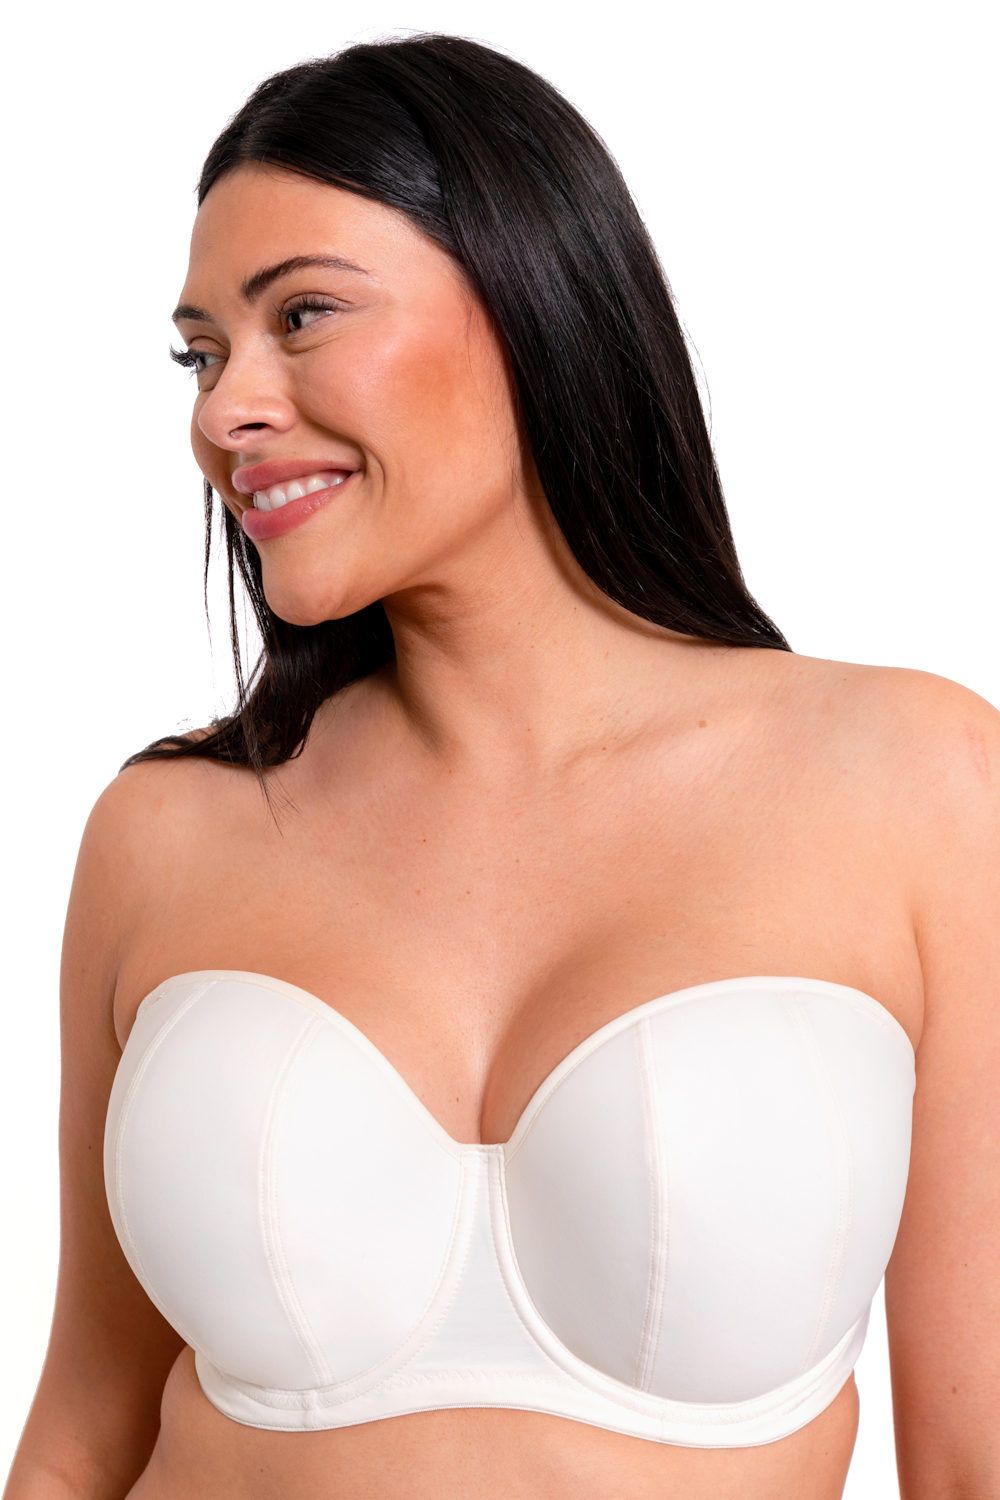 Undies and more - You need a Multiway/strapless bra in your closet